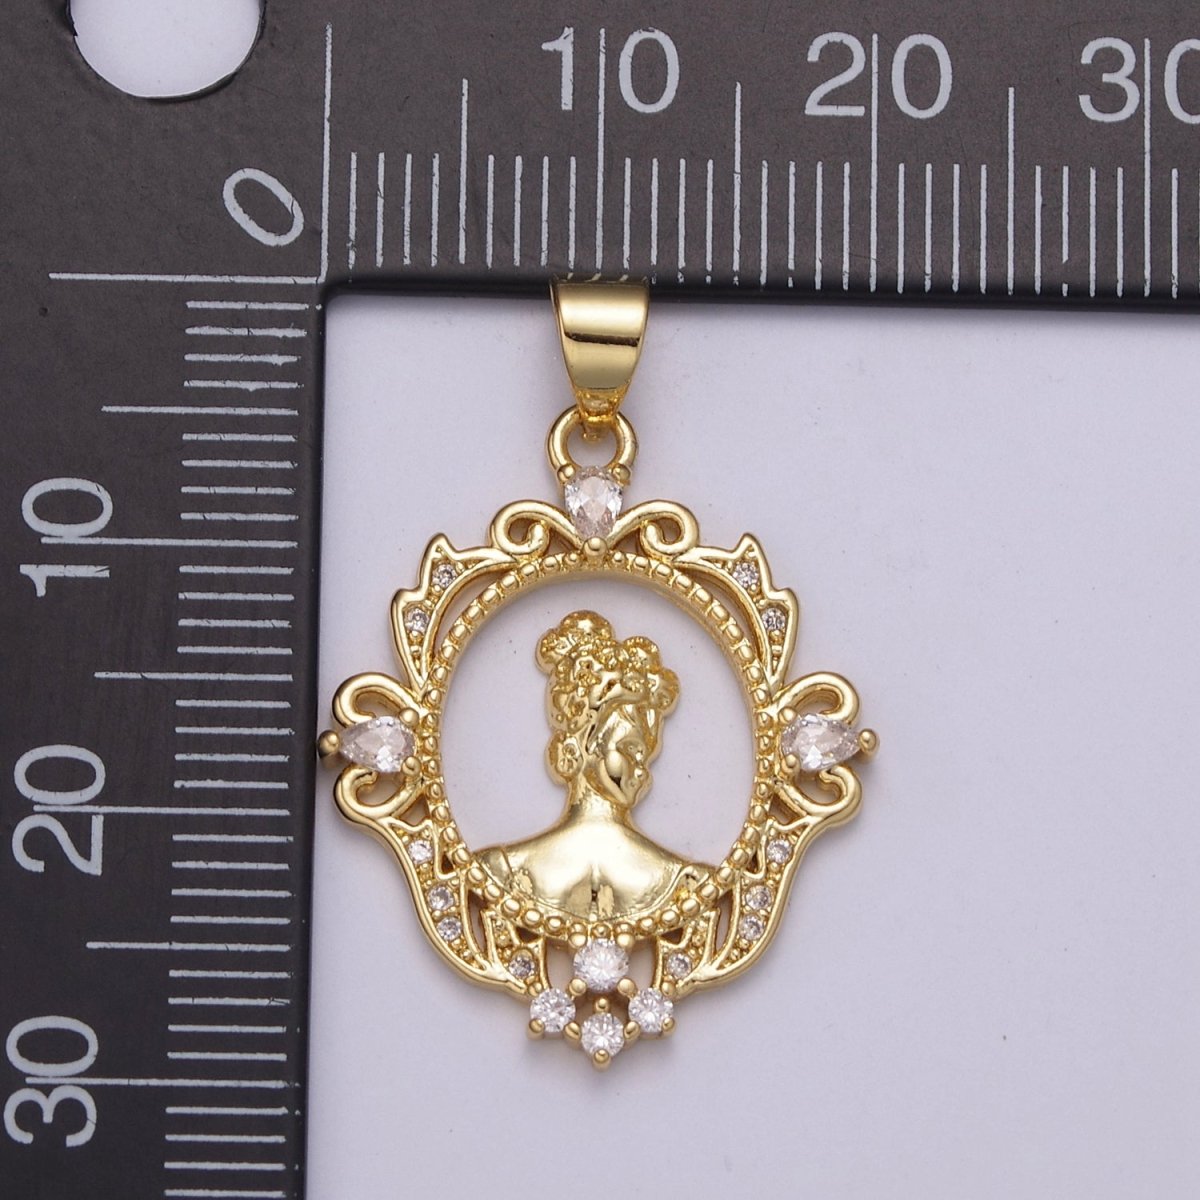 Dainty Gold Cameo Pendant Victorian Inspired Queen in the Mirror N-529 - DLUXCA